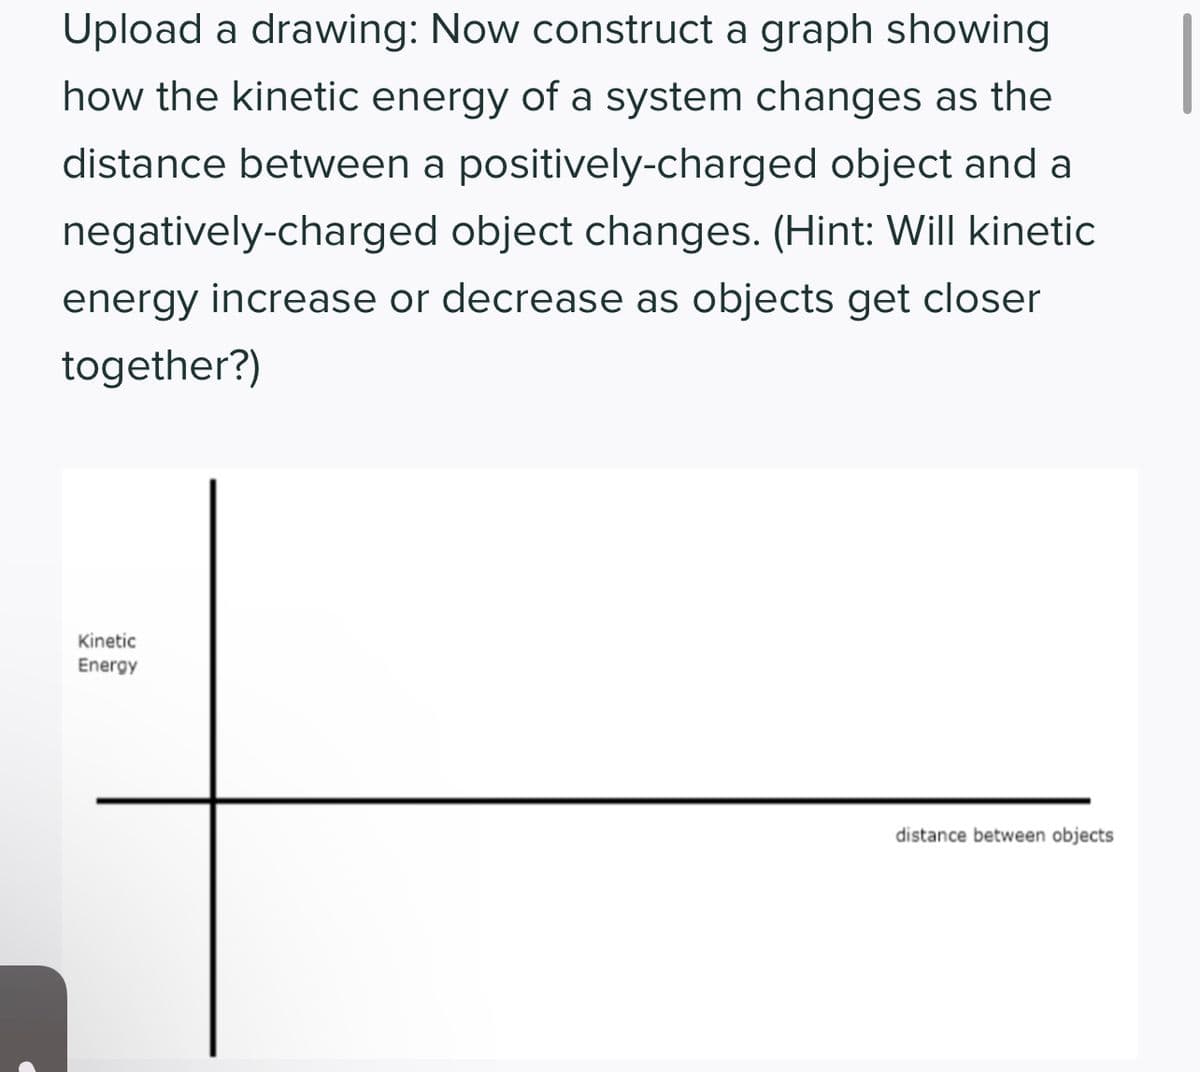 Upload a drawing: Now construct a graph showing
how the kinetic energy of a system changes as the
distance between a positively-charged object and a
negatively-charged object changes. (Hint: Will kinetic
energy increase or decrease as objects get closer
together?)
Kinetic
Energy
distance between objects